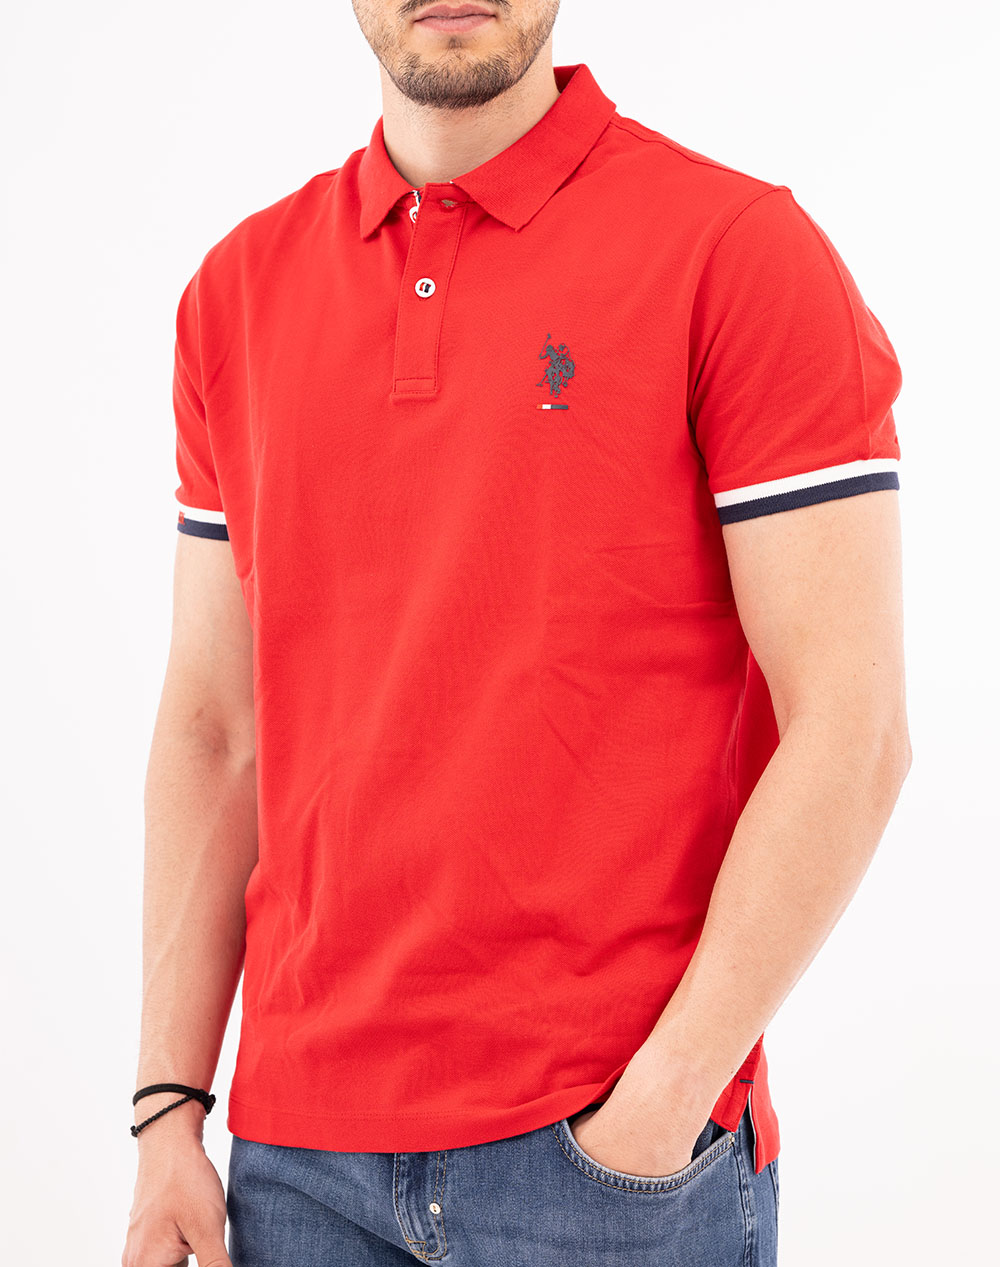 US POLO ASSN POLO 43472 MH3D POLO ΜΠΛΟΥΖΑ ΑΝΔΡΙΚΟ 6753943472-155 Red